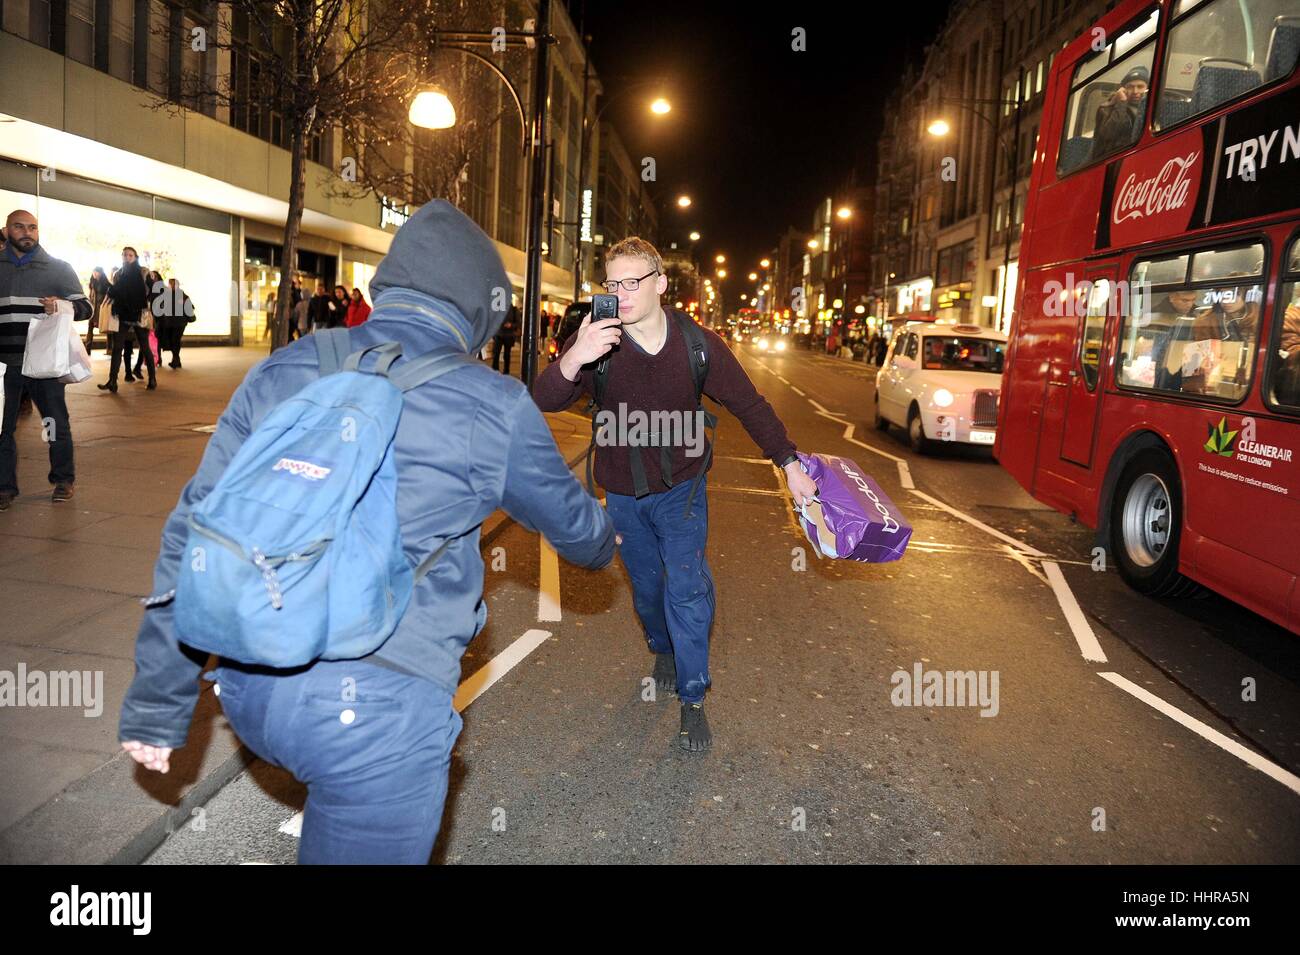 London, UK. 20th Jan, 2017. Pro Trump supporter fights with a protester in Oxford Street. Donald Trump protest goes on an unofficial march through London from the US Embassy in London, UK Credit: Dorset Media Service/Alamy Live News Stock Photo